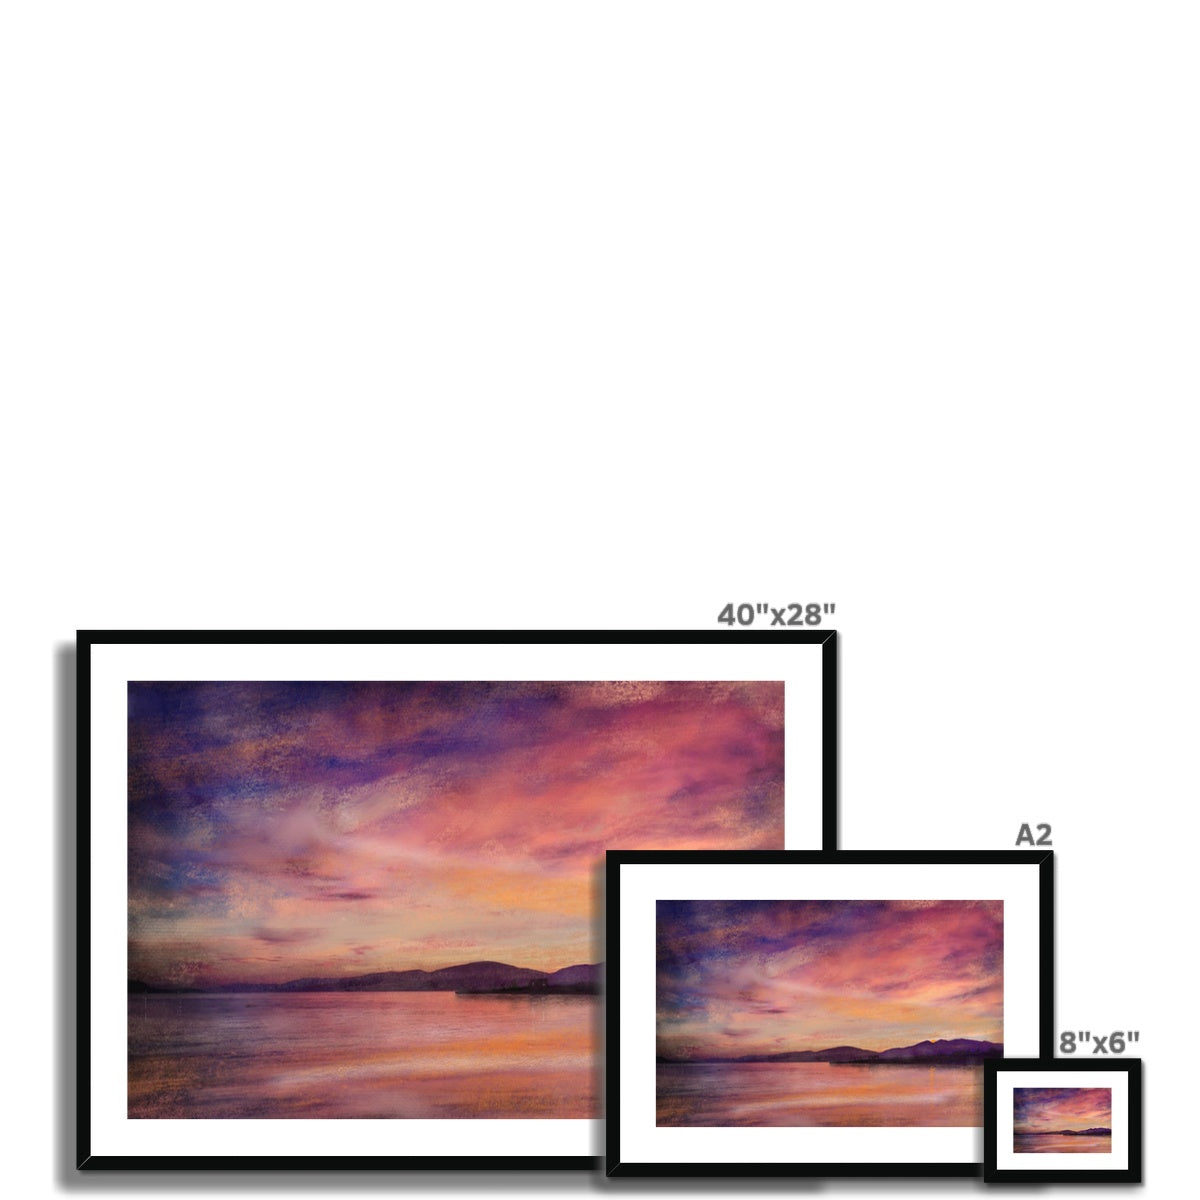 Loch Linnhe Dusk Painting | Framed & Mounted Prints From Scotland-Framed & Mounted Prints-Scottish Lochs & Mountains Art Gallery-Paintings, Prints, Homeware, Art Gifts From Scotland By Scottish Artist Kevin Hunter